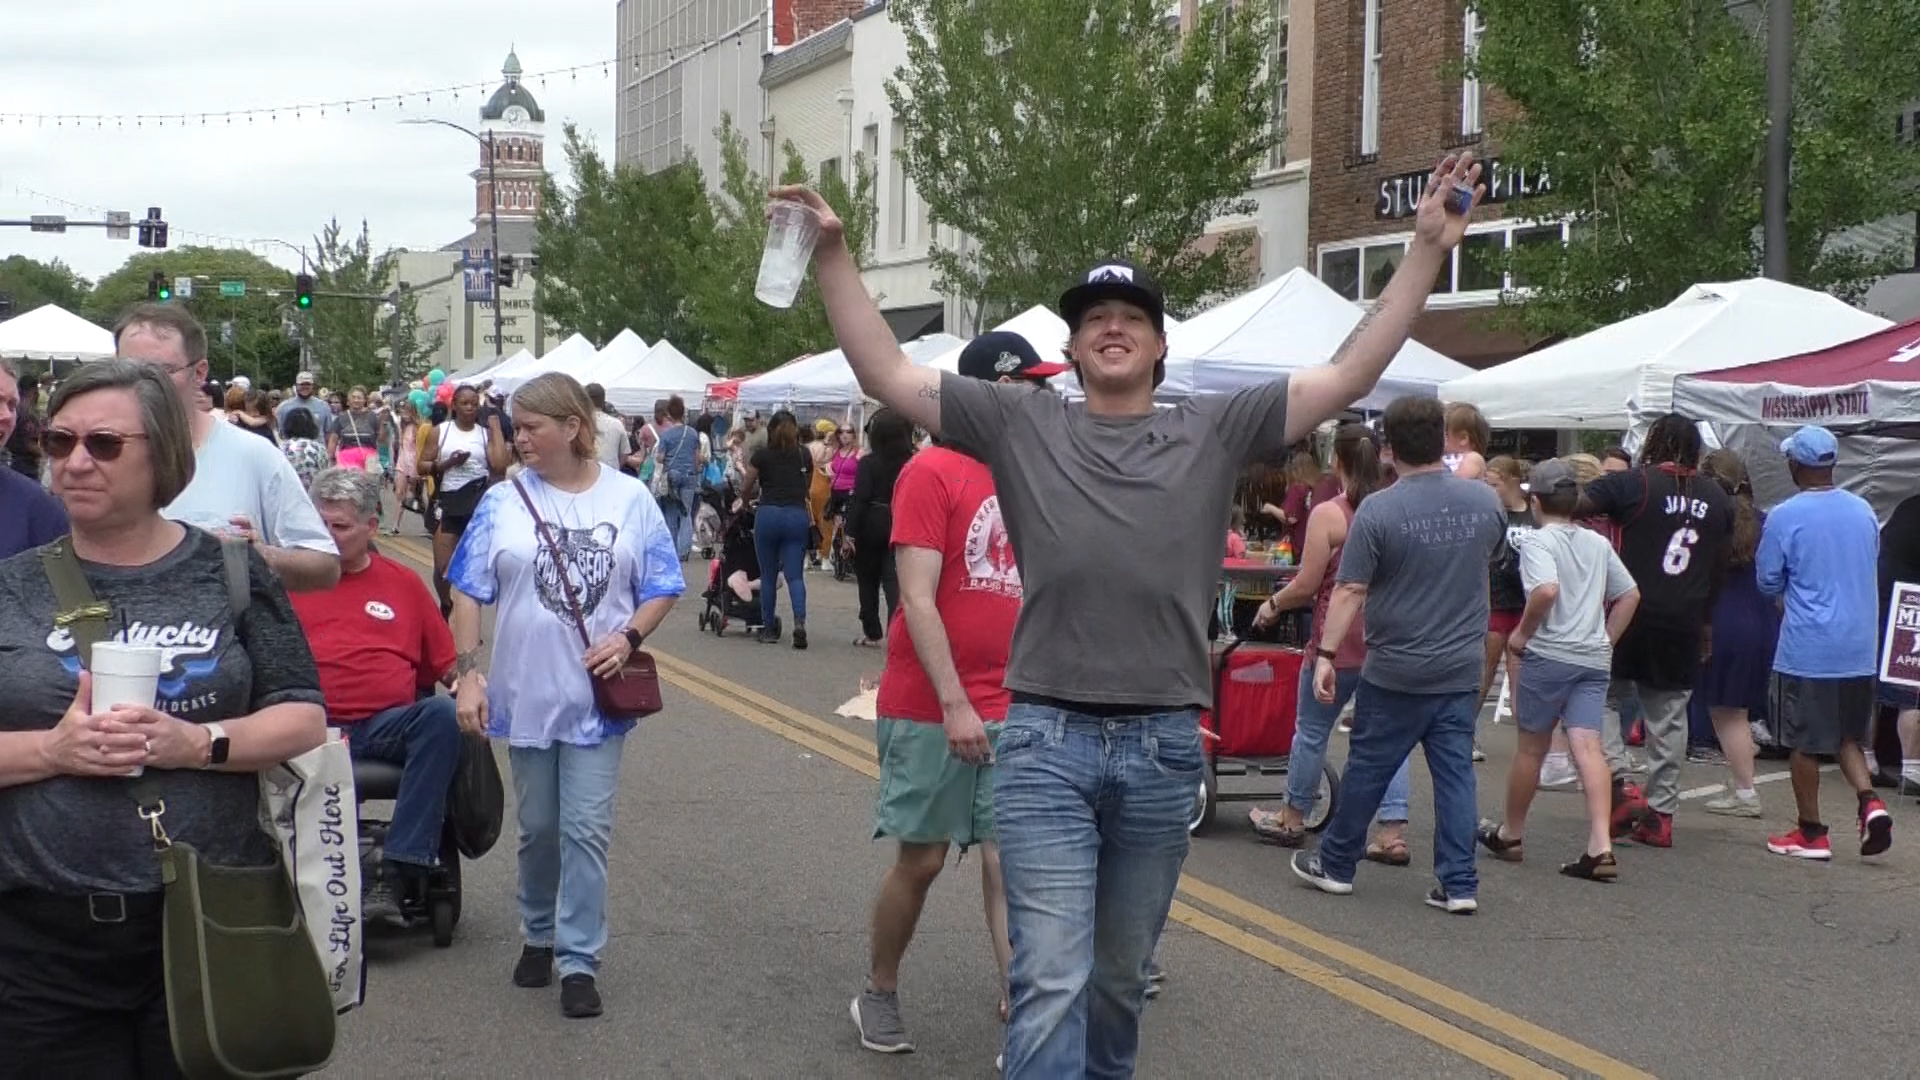 Thousands turn out for annual Market Street Festival